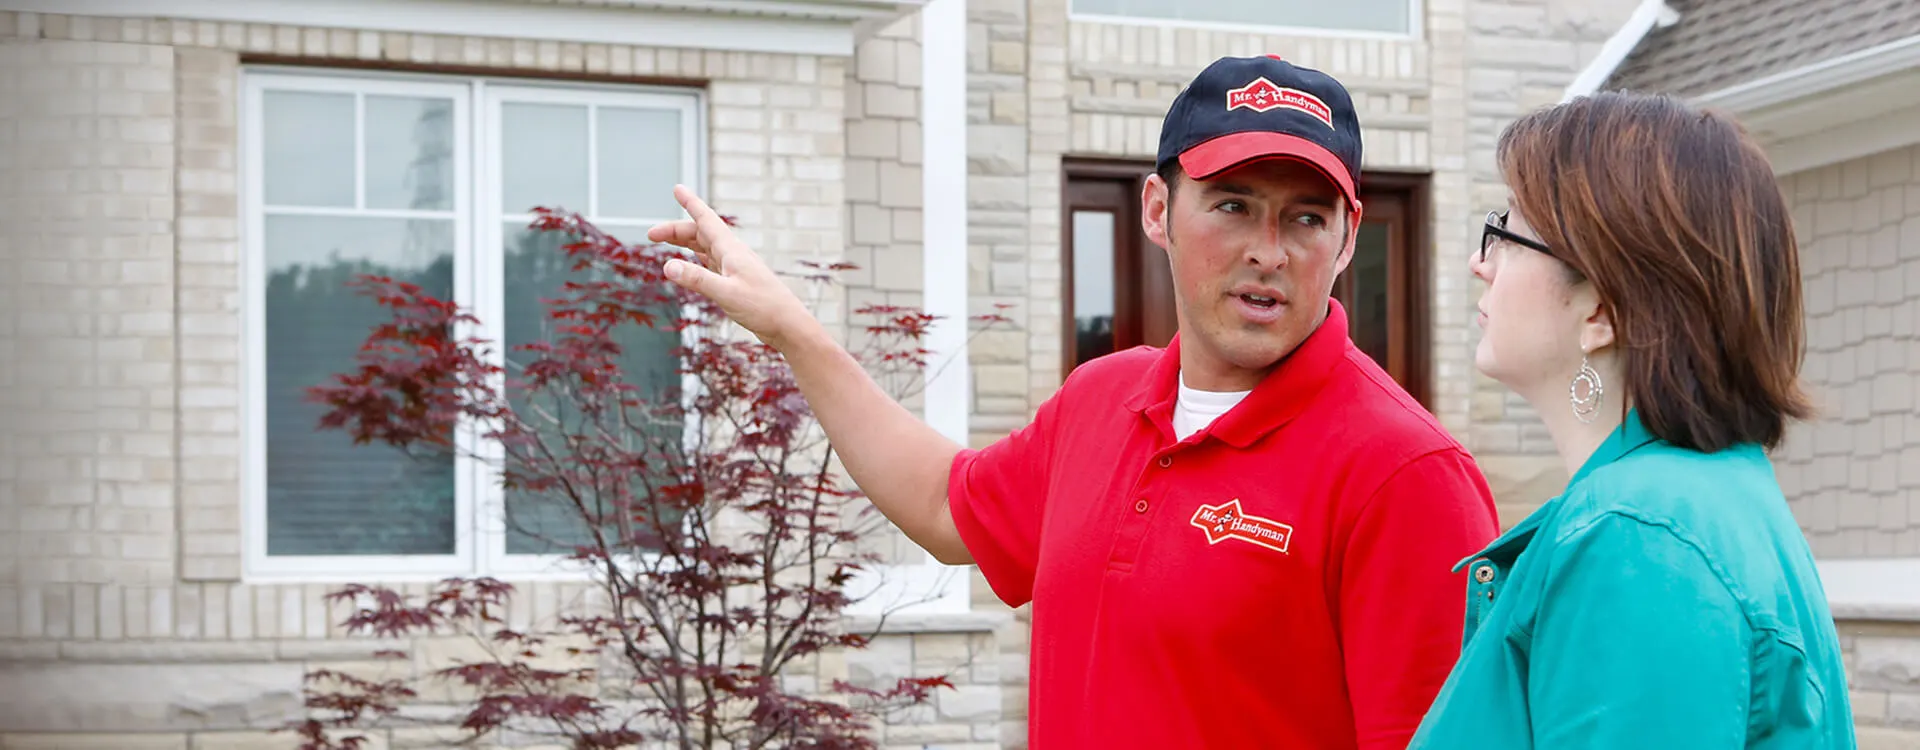 A handyman dressed in the Mr. Handyman uniform pointing to a home and speaking with a homeowner.